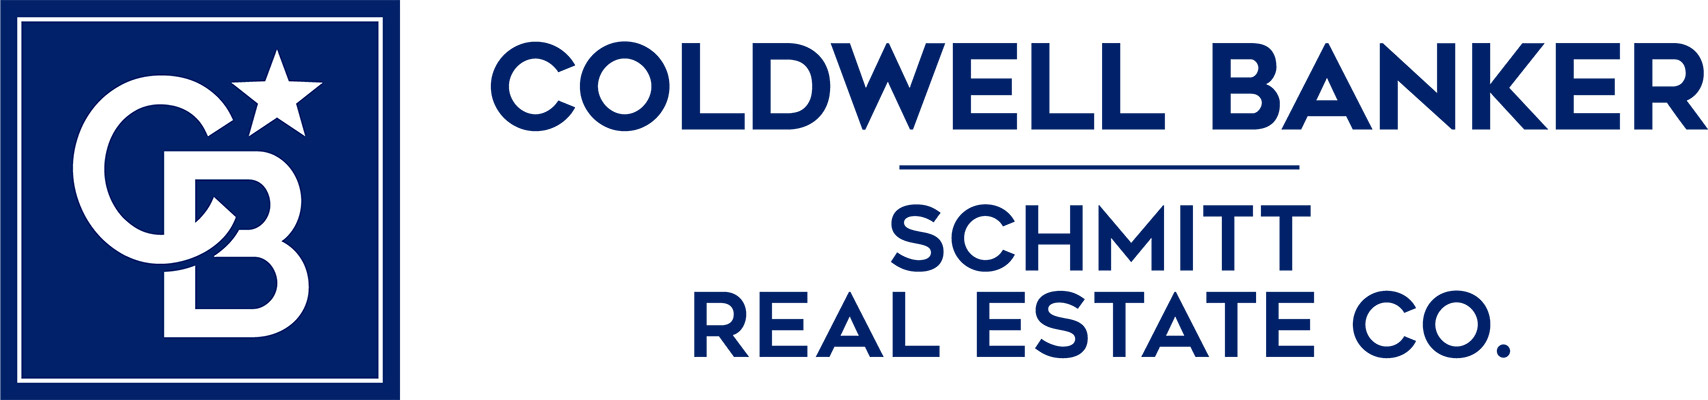 Ruth Pasquale - Coldwell Banker Logo